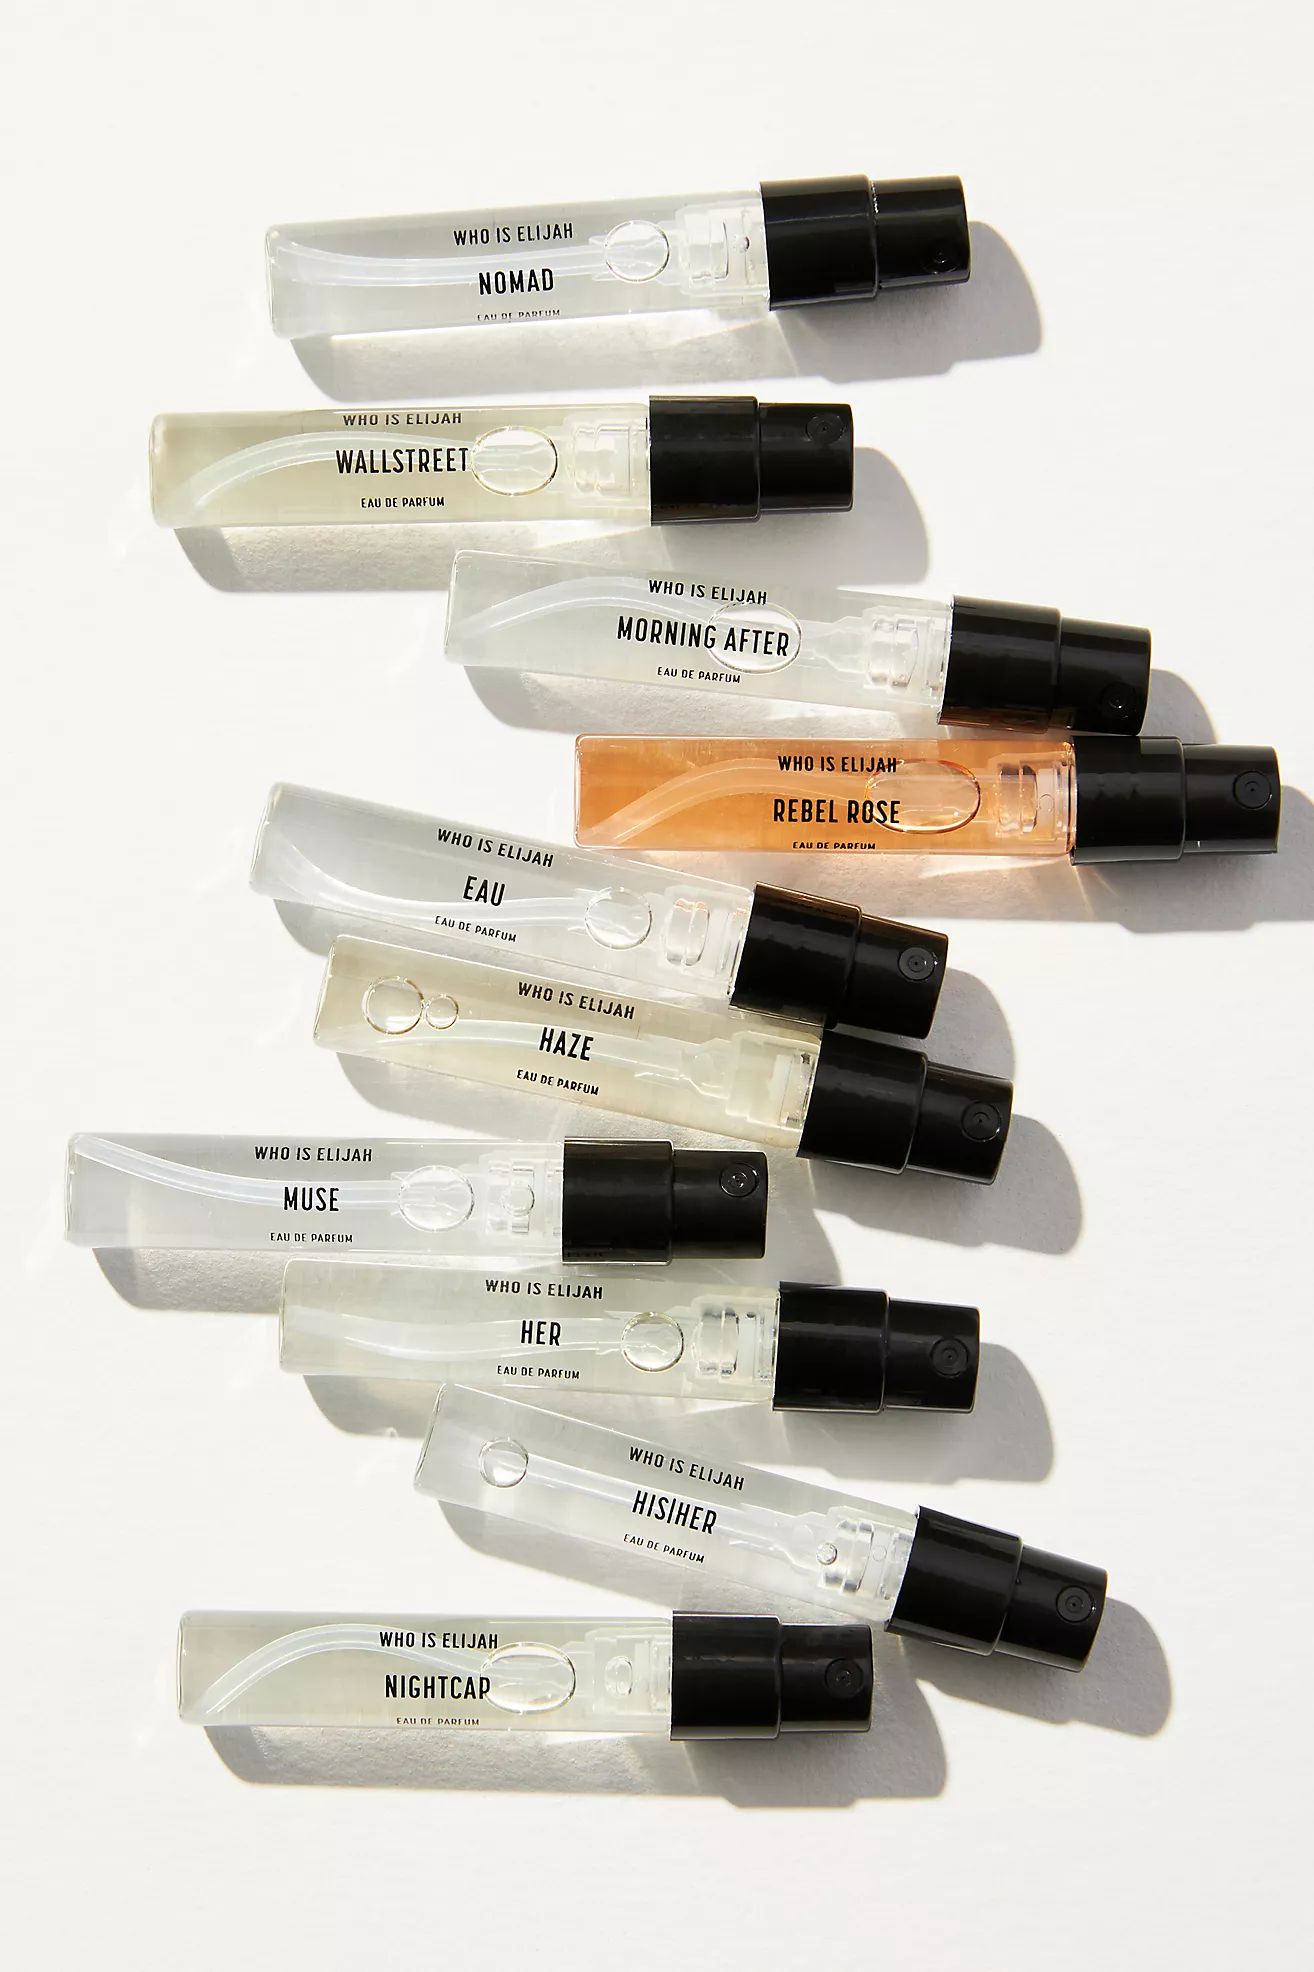 who is elijah Discovery Set 10 Vial | Anthropologie (US)